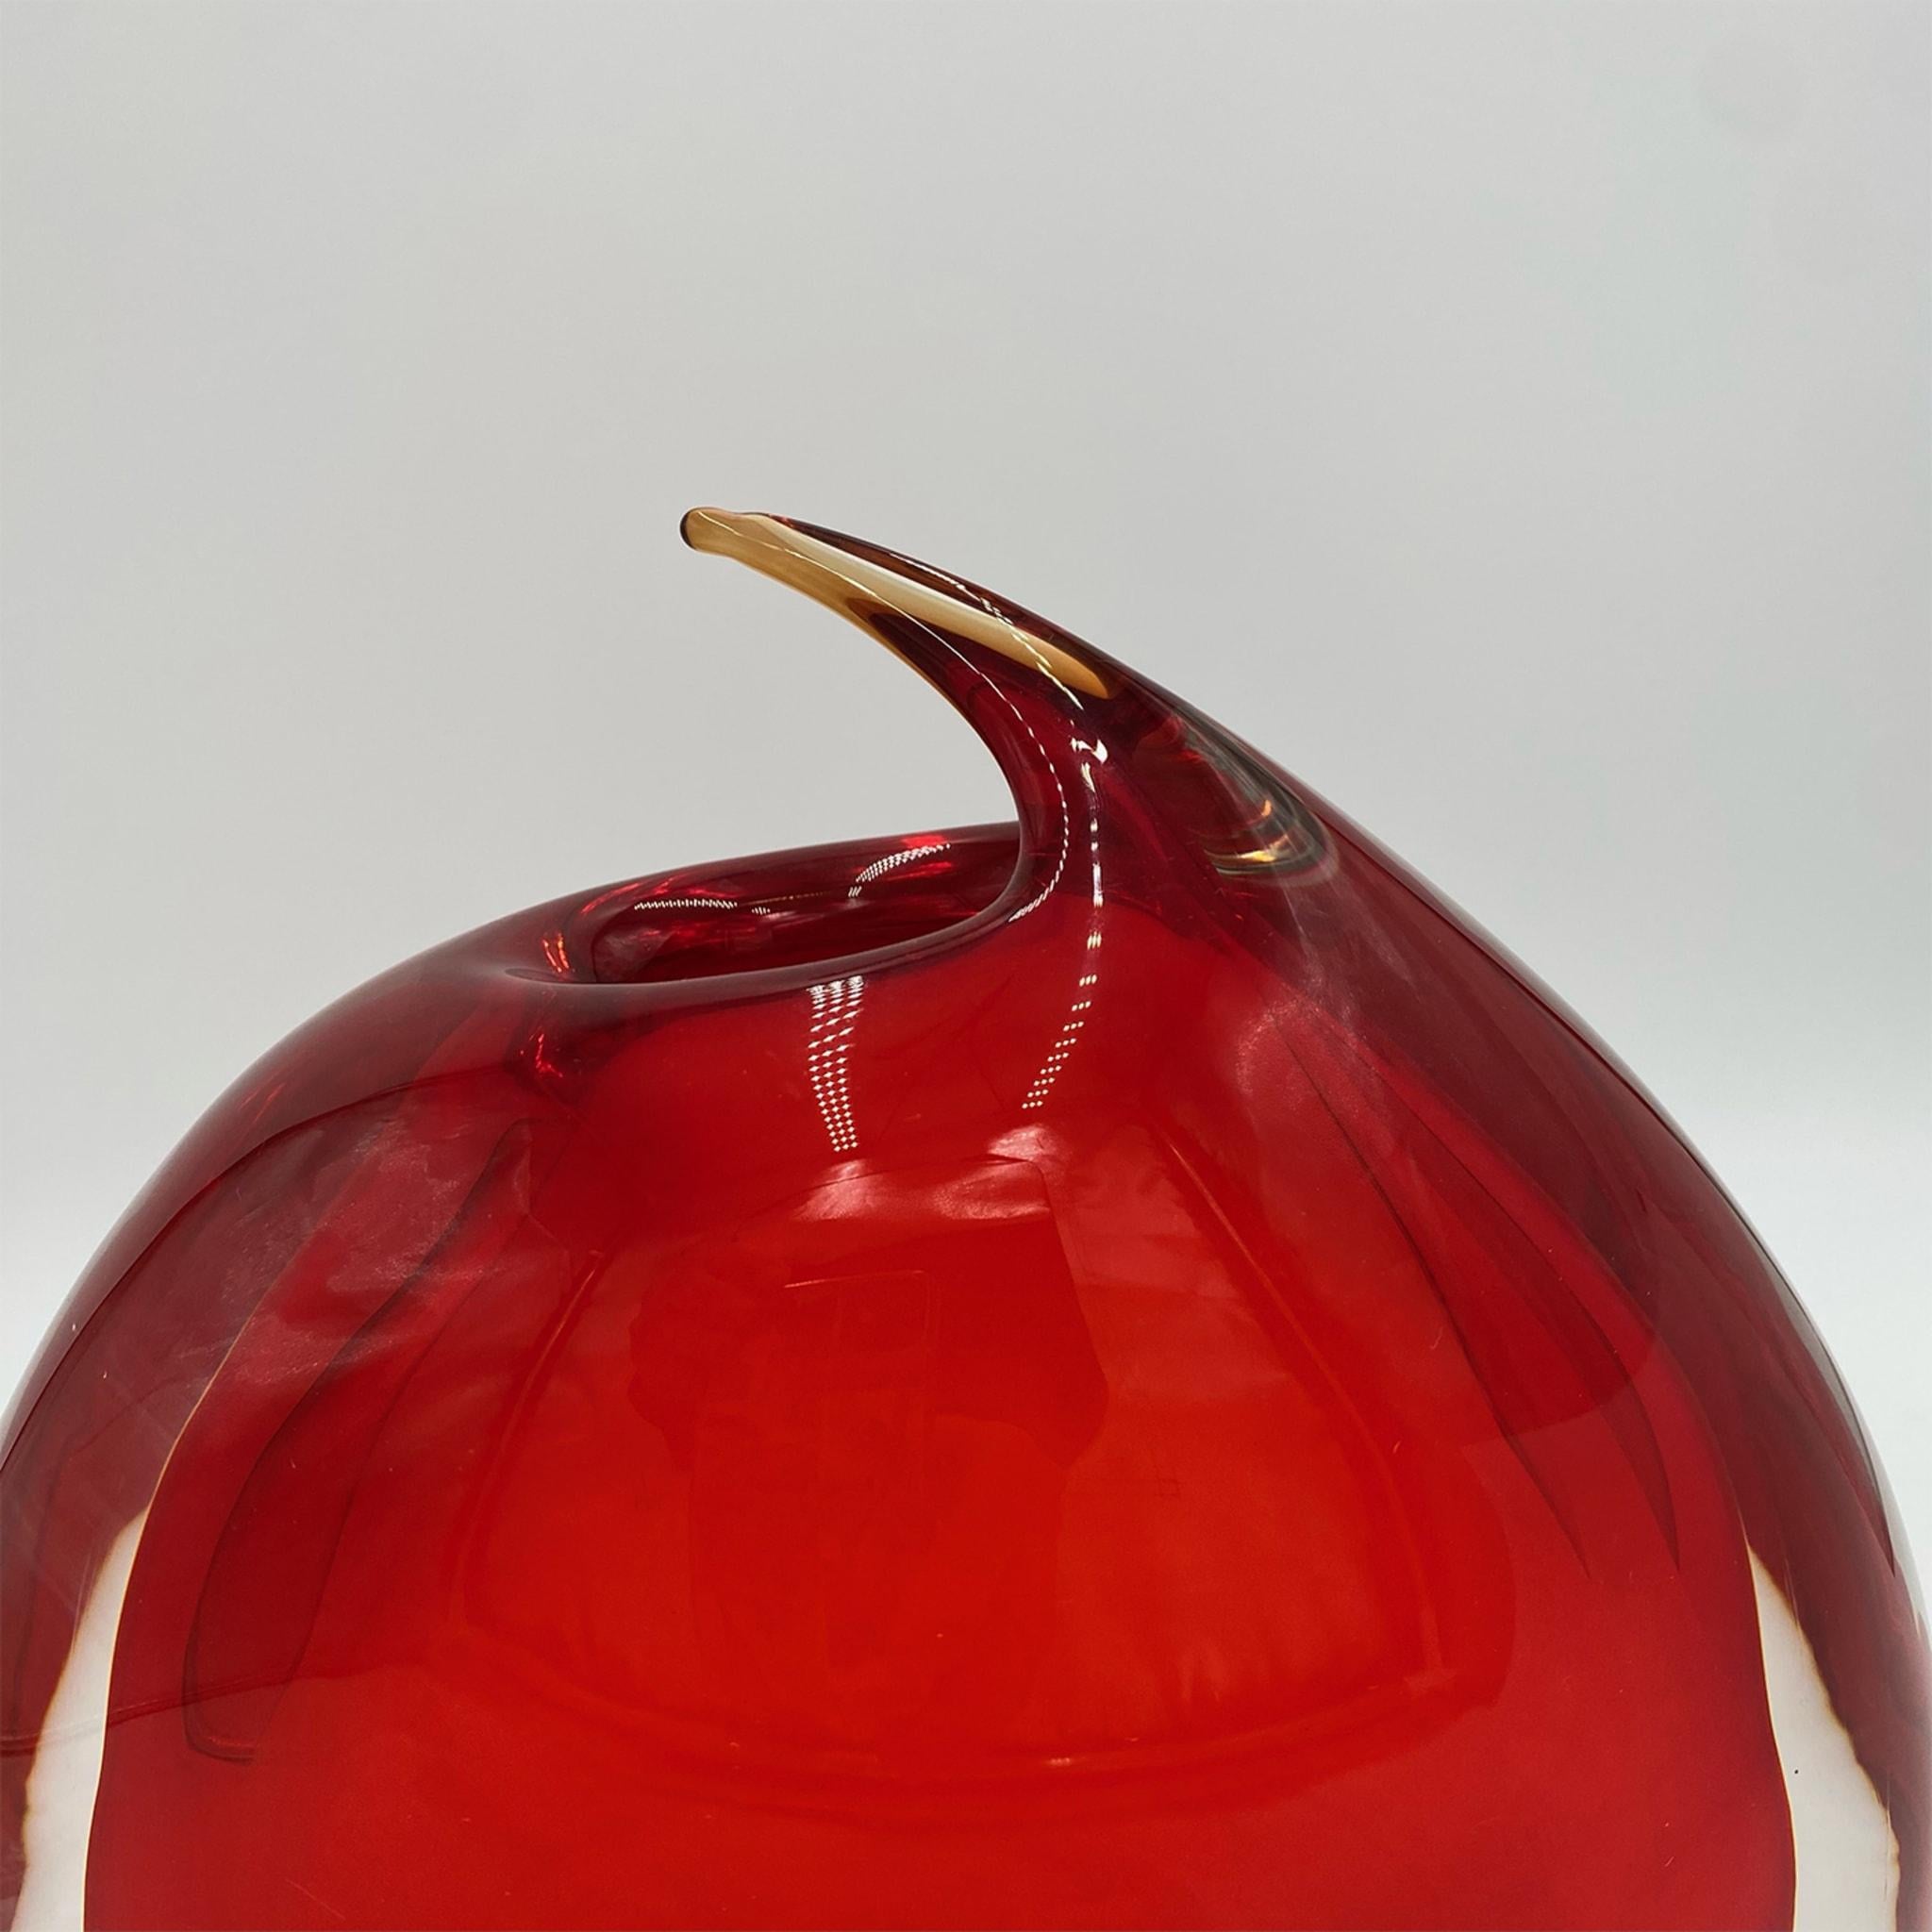 A singular glass design of rare charm, this vase is sure to accent contemporary dressers or sideboards with an extra dash of refinement. Its name - the Italian for nail - is owed to the curve protruding from its mouth, an element that breaks the